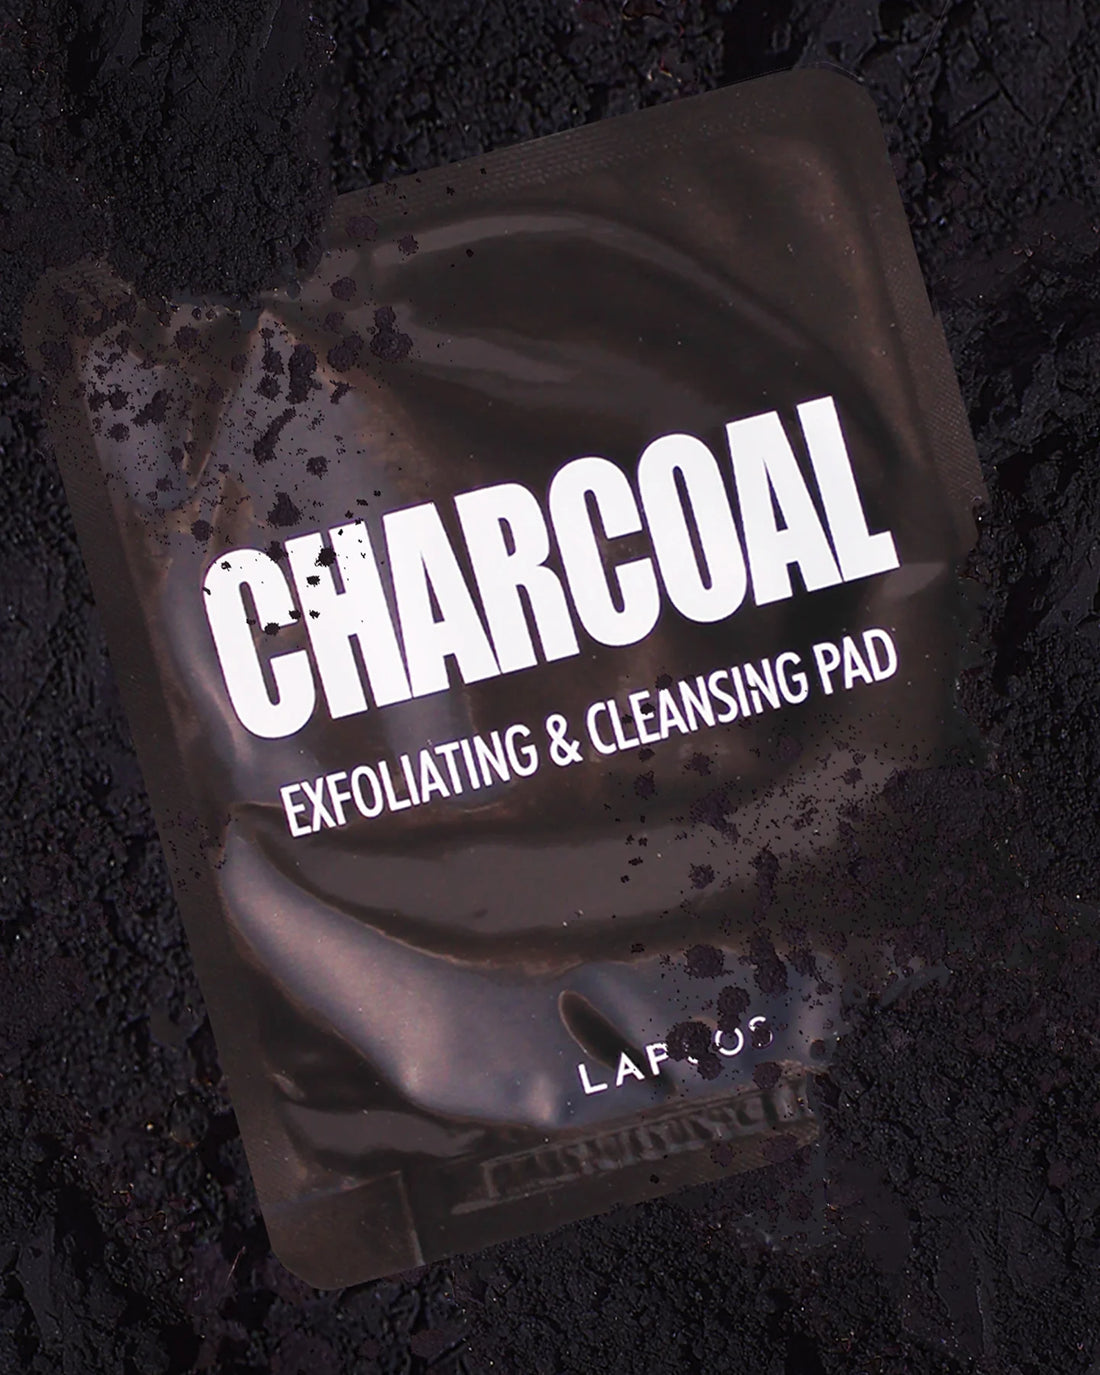 LAPCOS Charcoal exfoliating &amp; cleansing pad at heaven on earth 